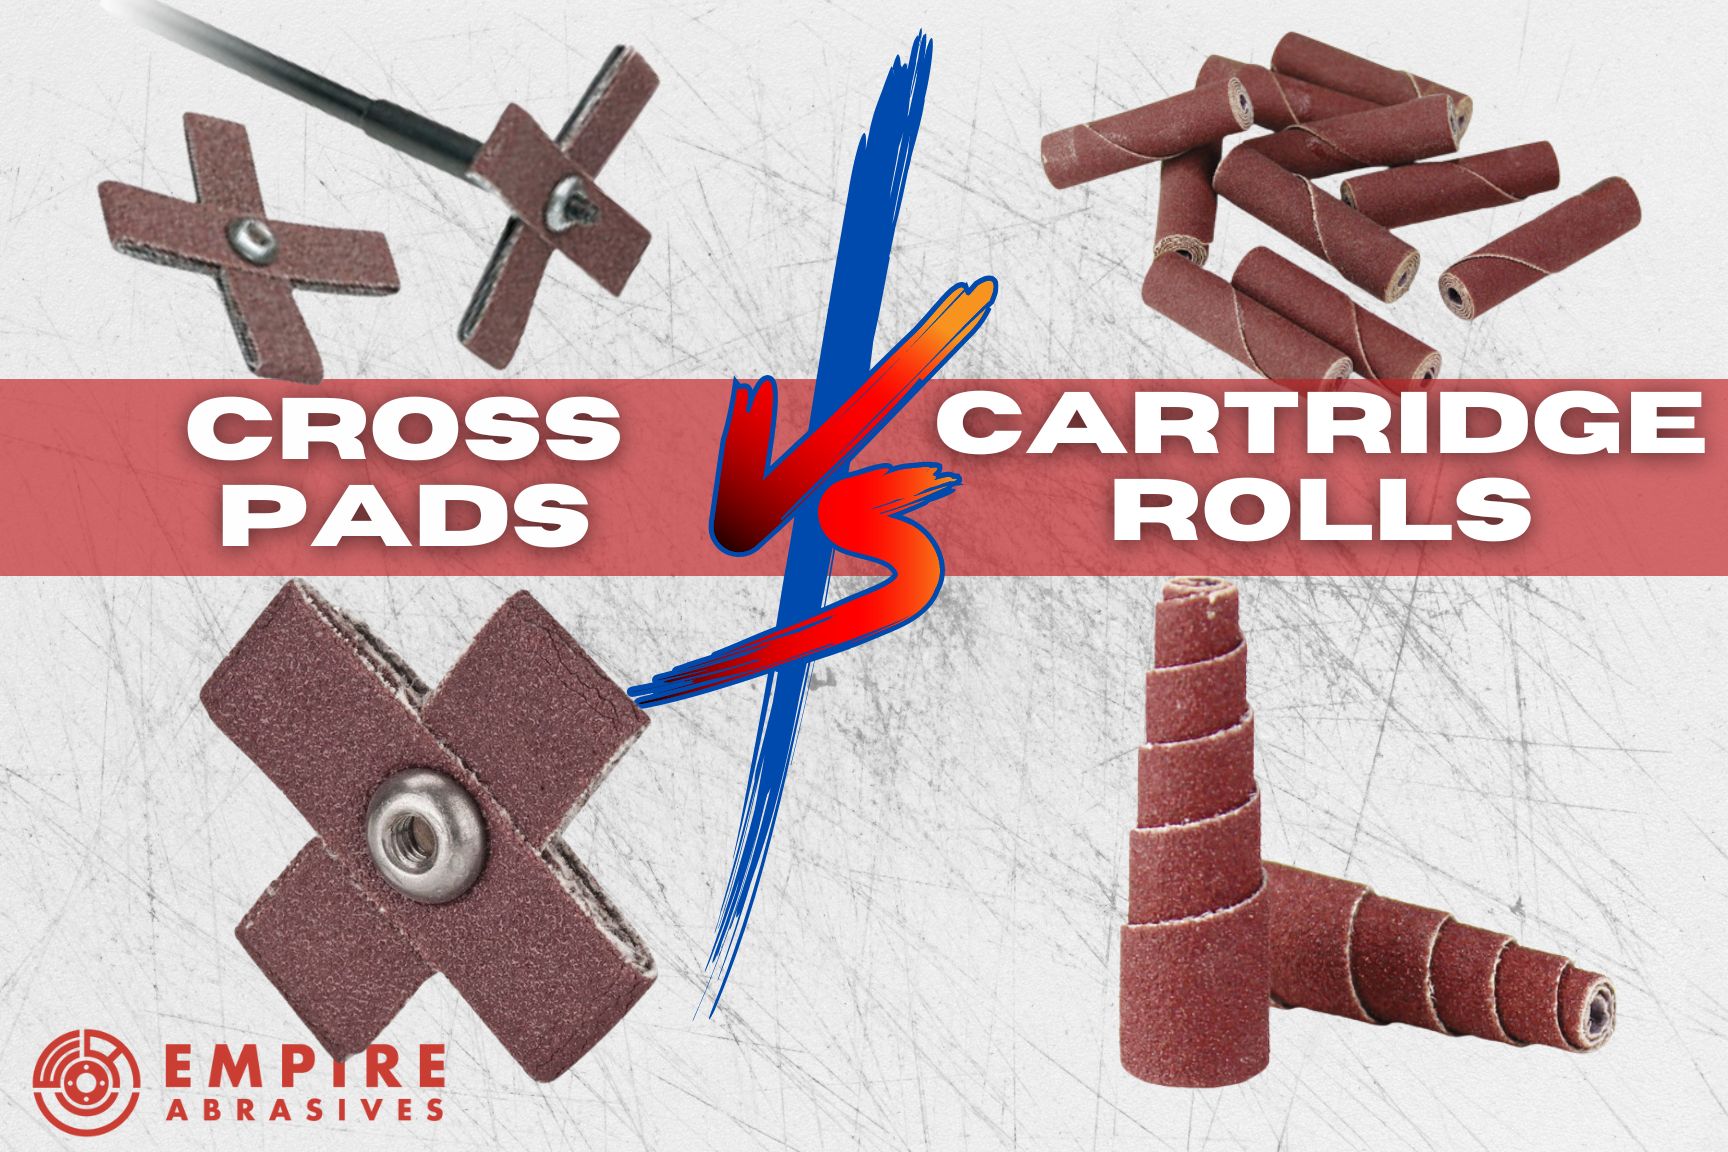 Cross pads vs cartridge rolls - deciding on the best abrasive products to buy